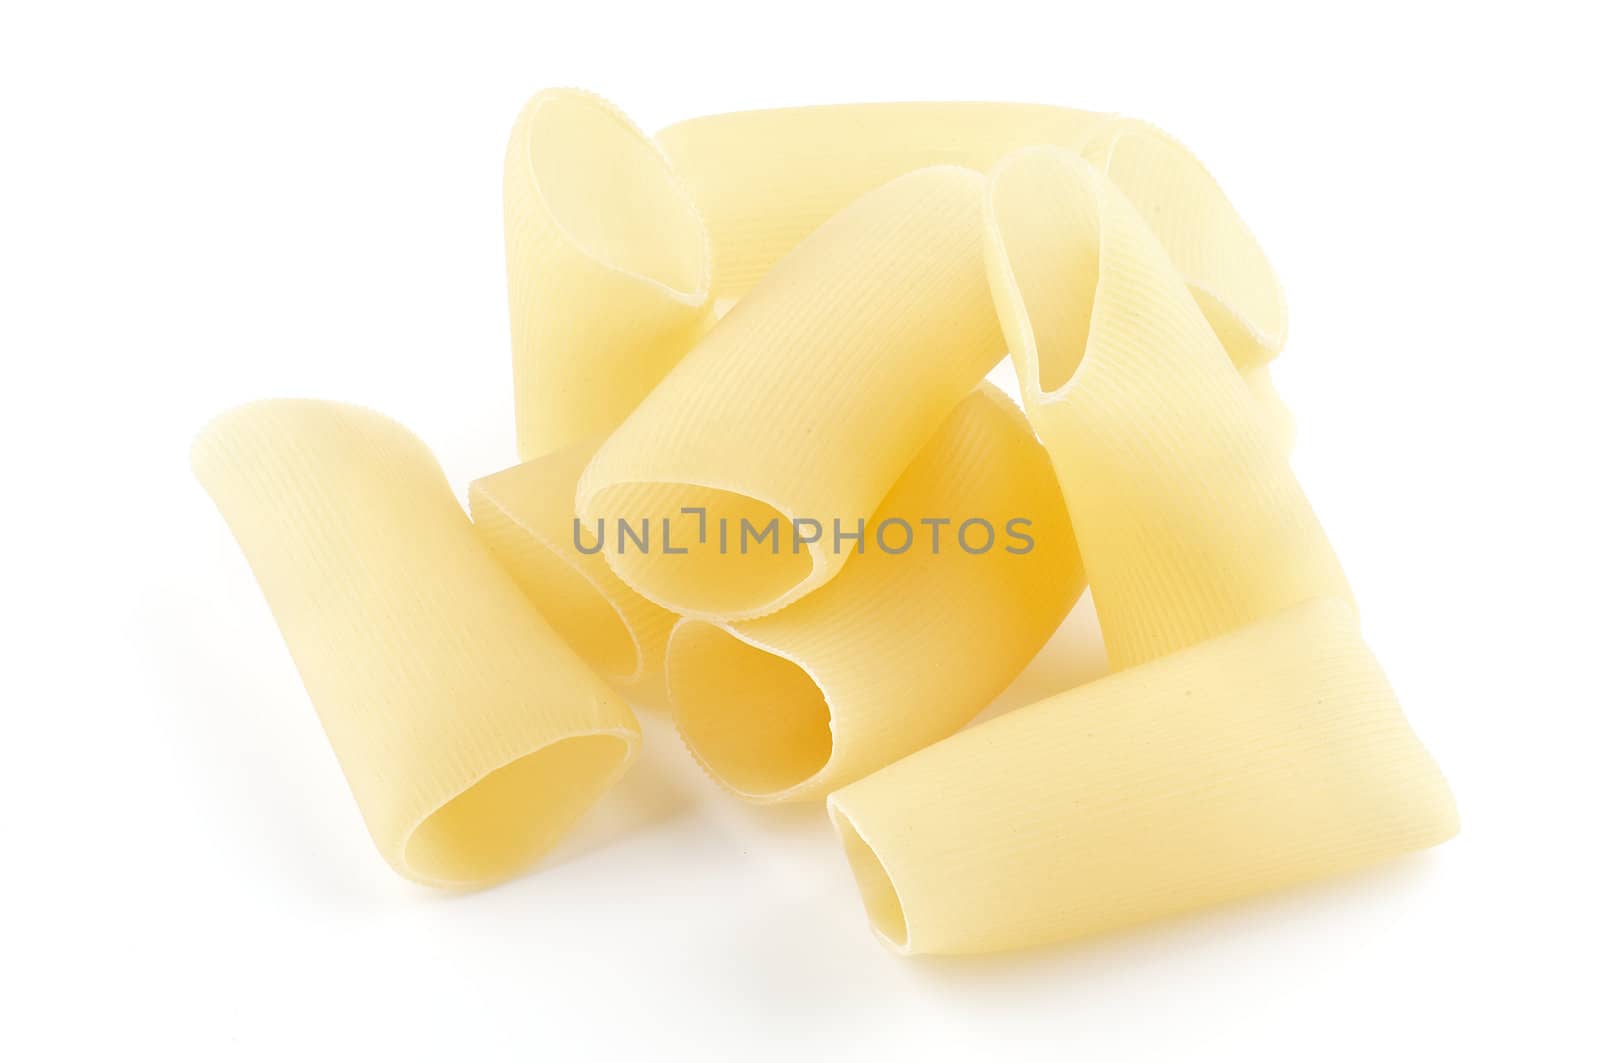 Cannelloni isolated on white background